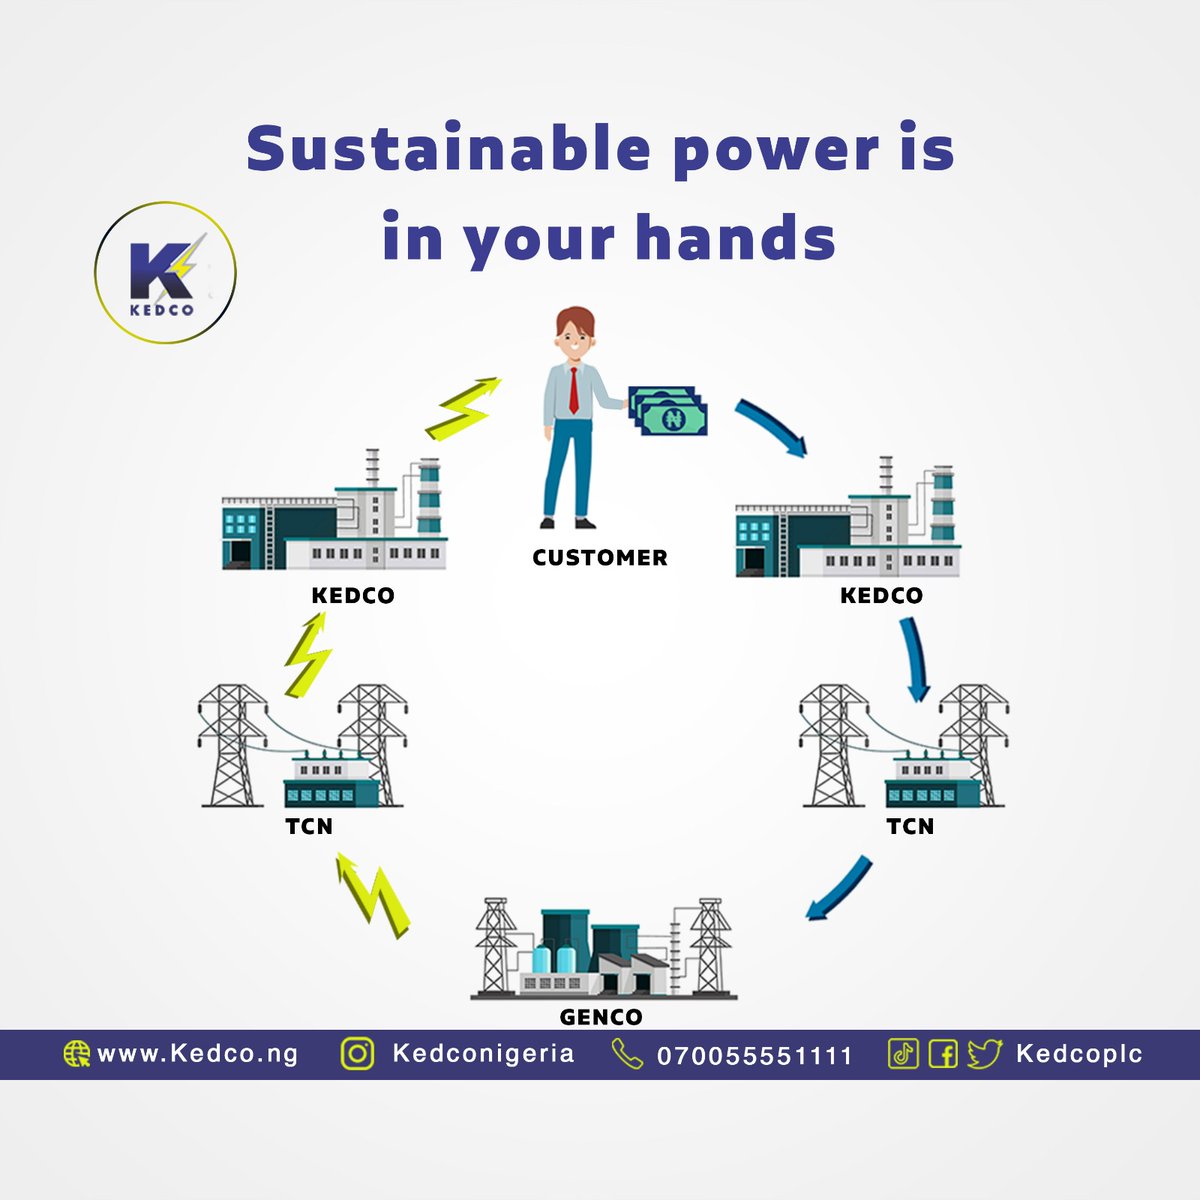 Dear esteemed customers,sustainable power is in your hands; pay your electricity bills for improved power.

#sustainablepowerisinyourhands
#paytoenableusserveyoubetter
#KEDCO 
#Empoweringlives